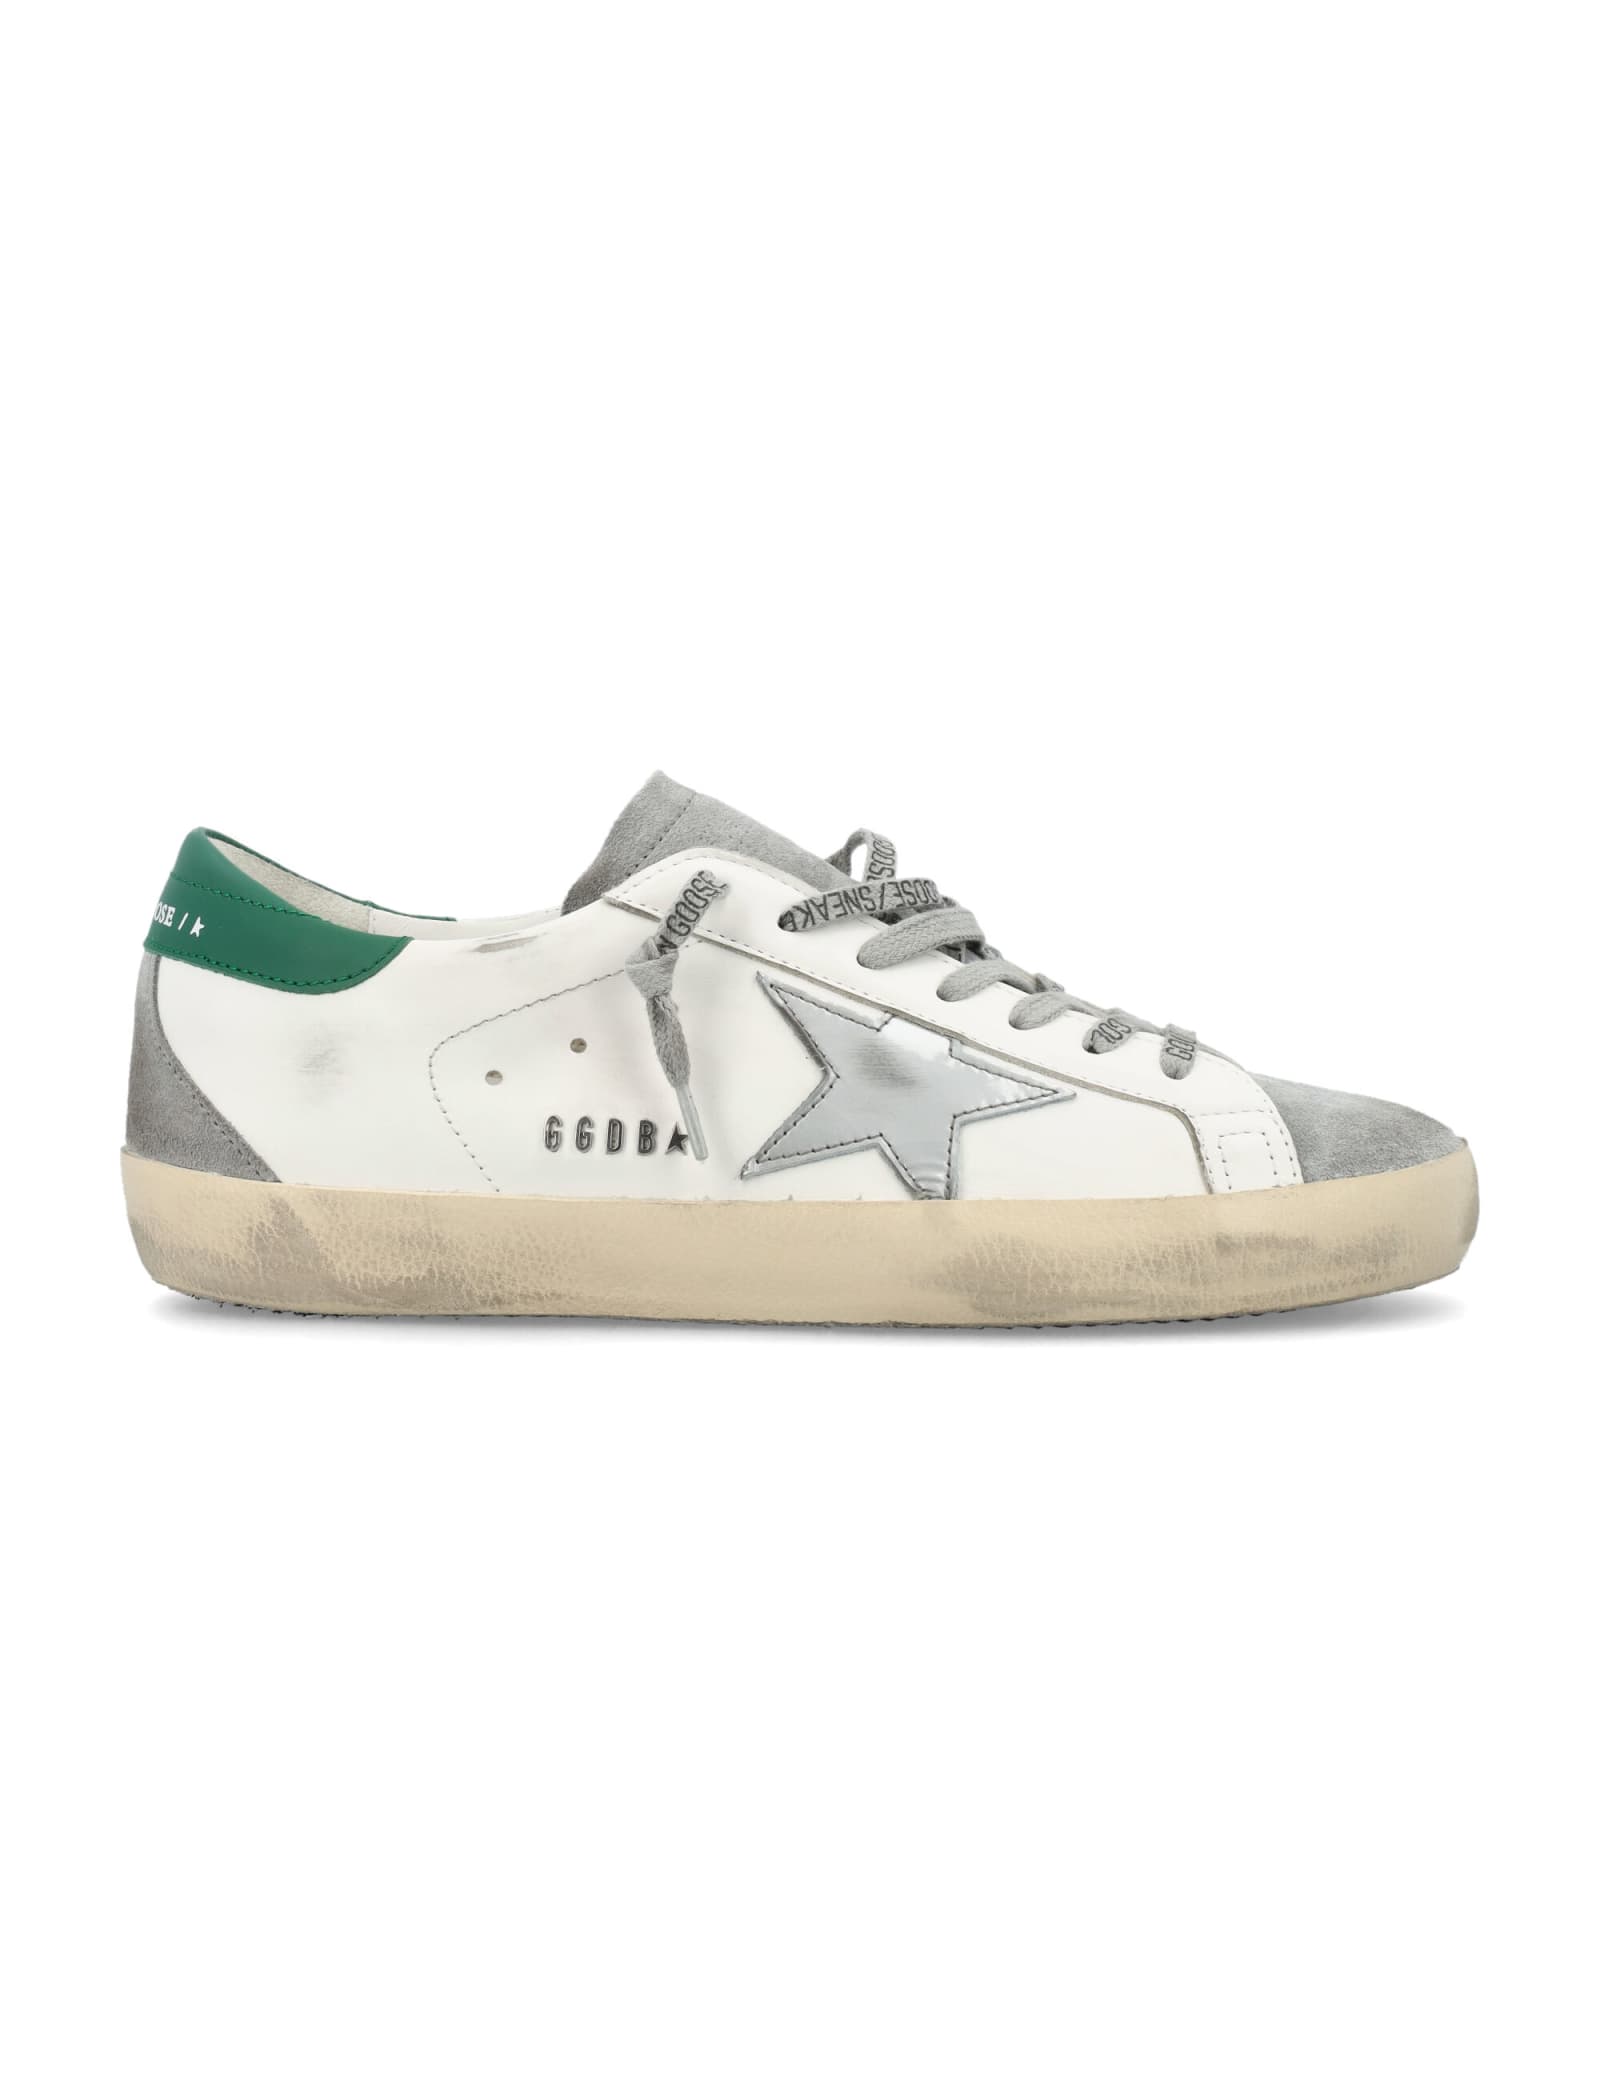 Shop Golden Goose Super-star Classic Sneakers In White Silver Green